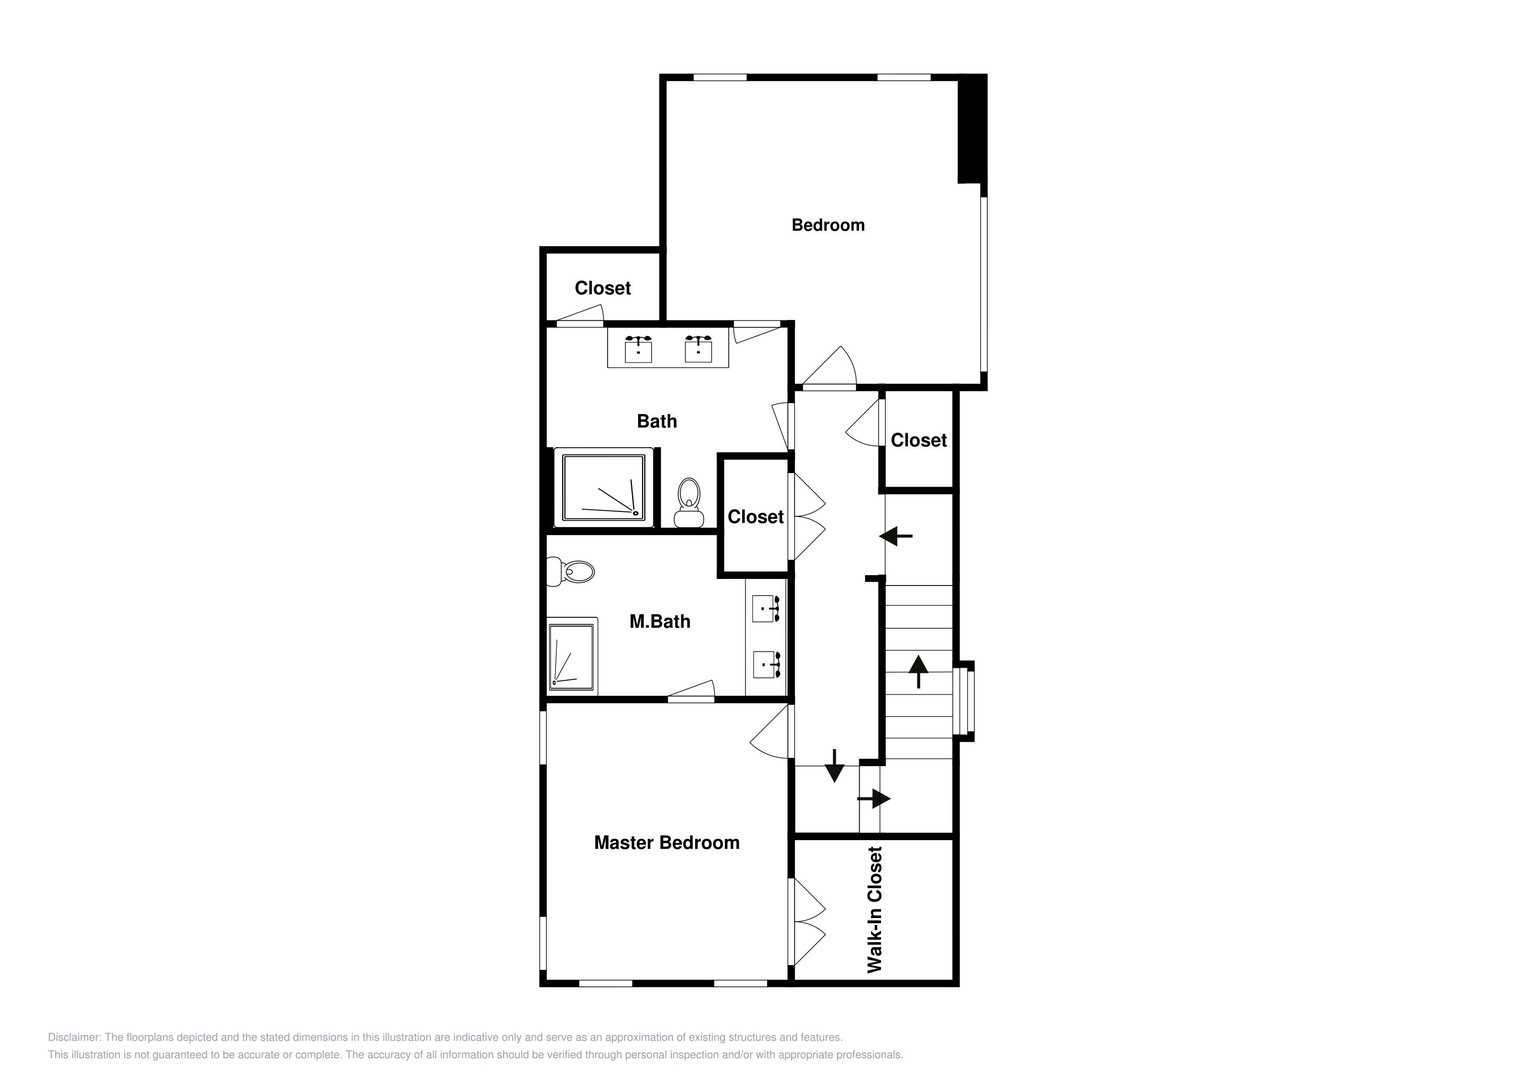 This floor plan is an approximation and may not include the most recent information